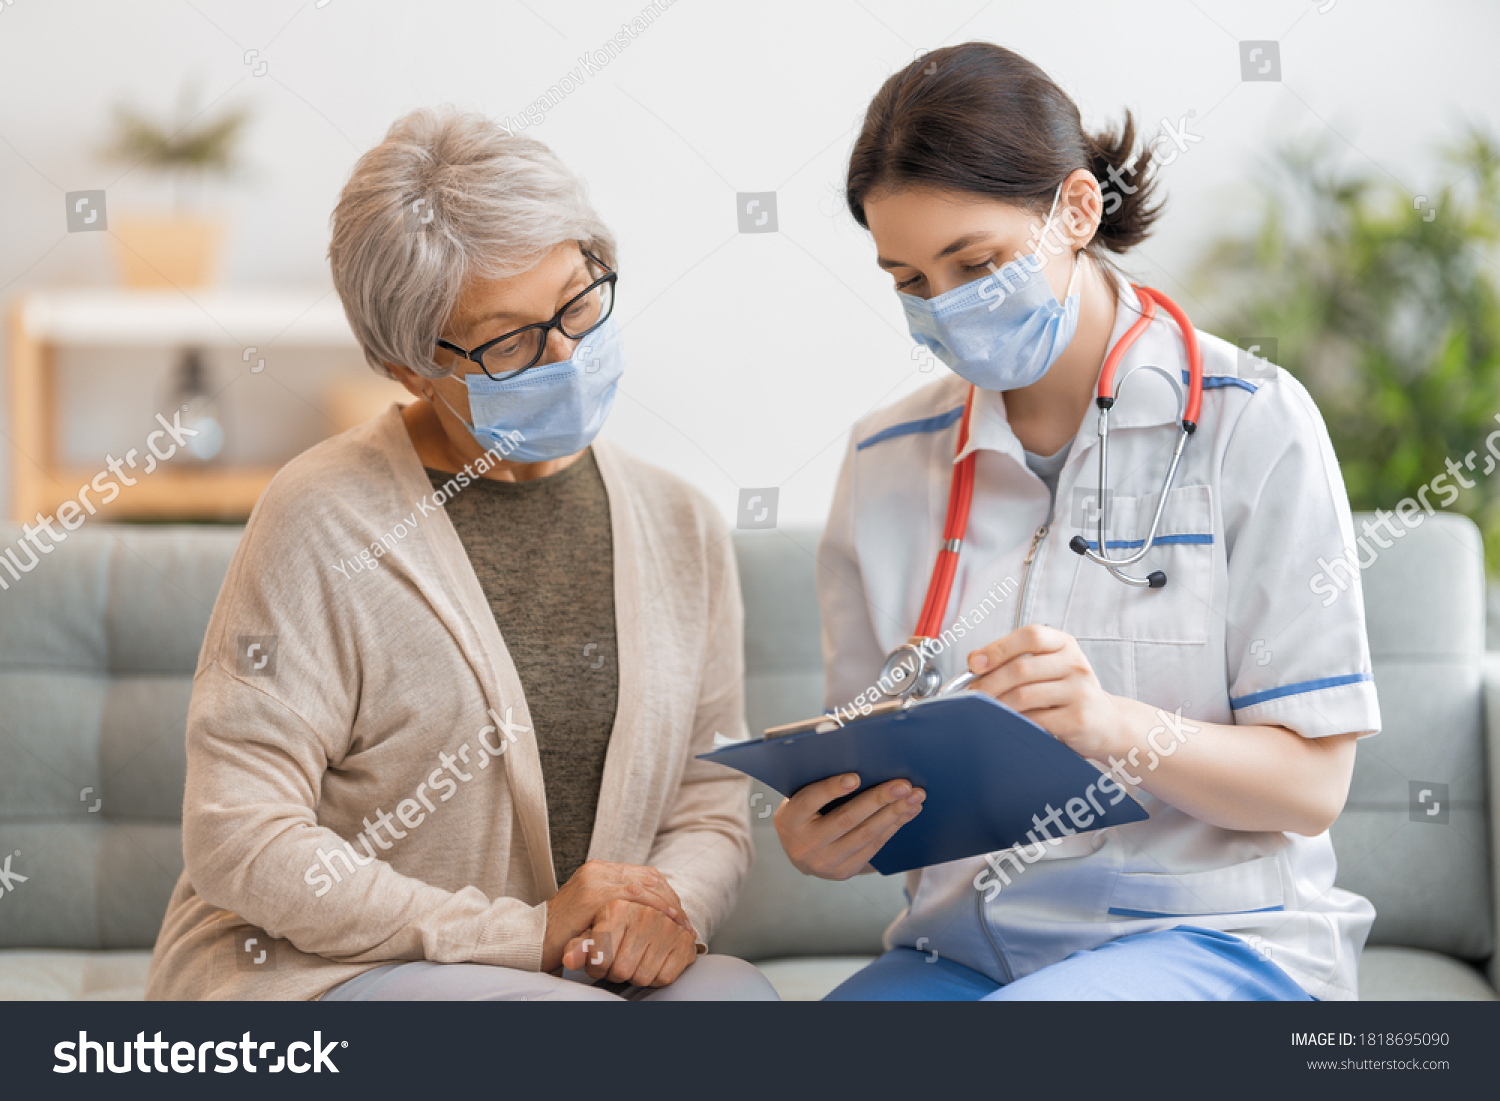 Doctor and senior woman wearing facemasks during coronavirus and flu outbreak. Virus protection. COVID-2019. Taking on masks. #1818695090